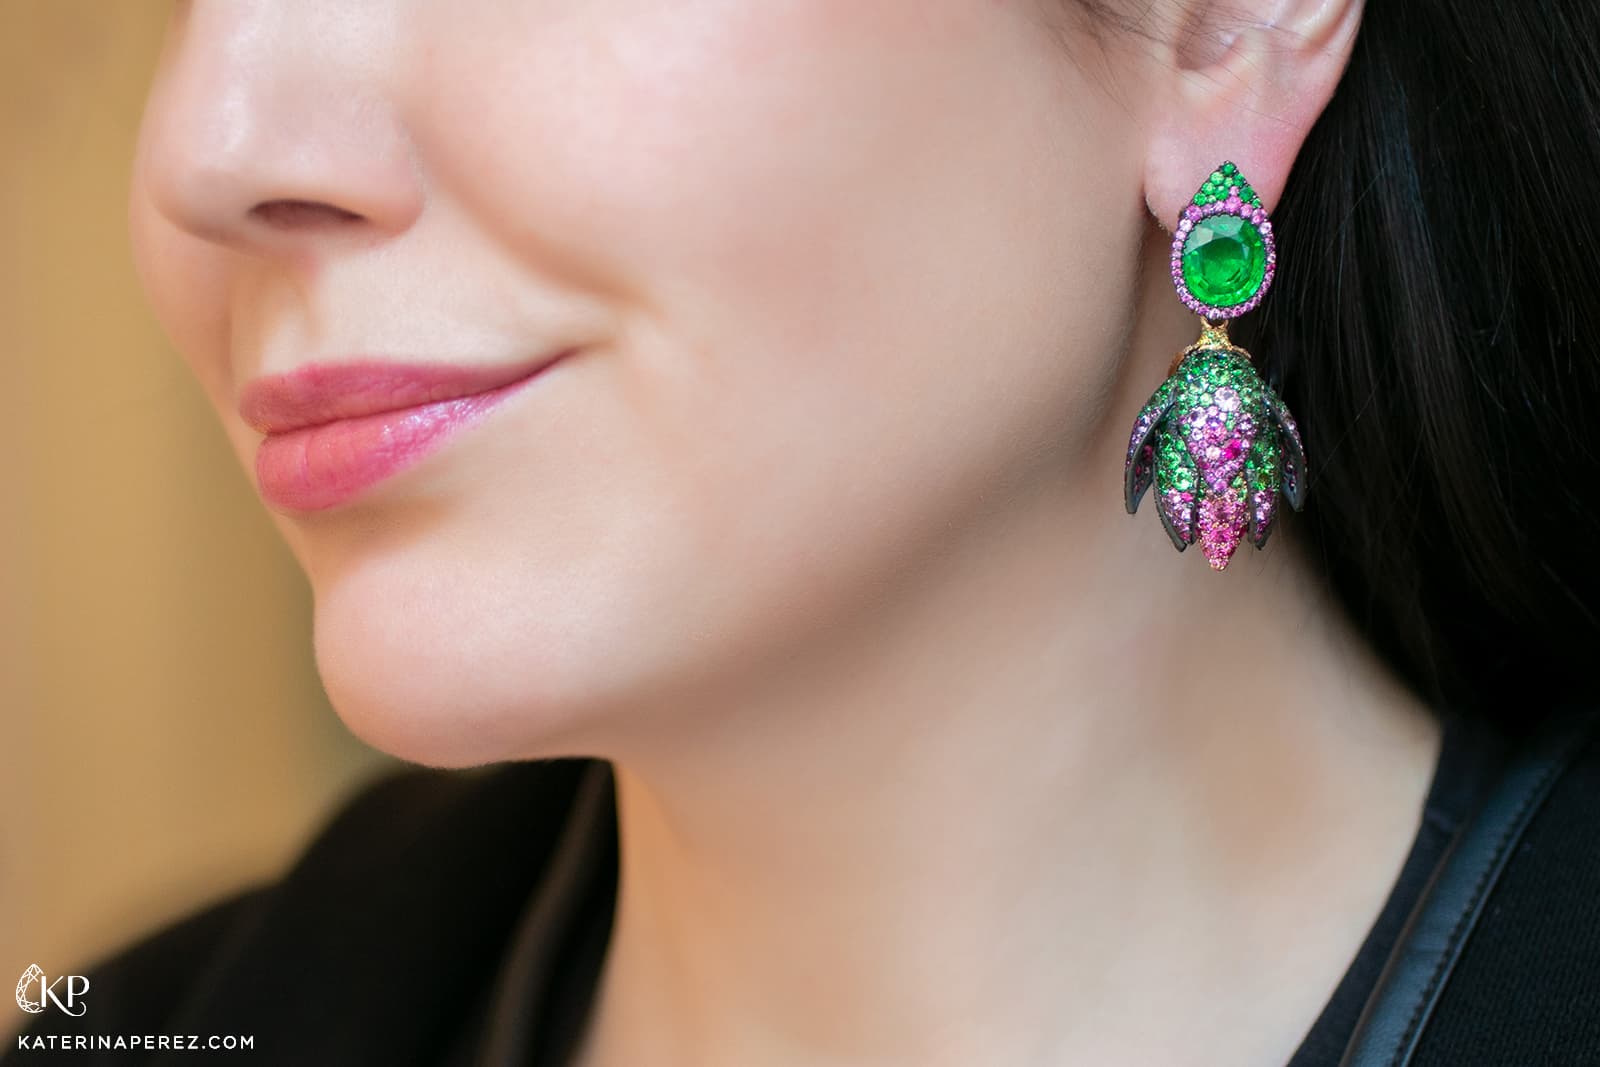 Katerina Perez wears a pair of floral drop earrings by Antonio Seijo in shades of vibrant pink and green